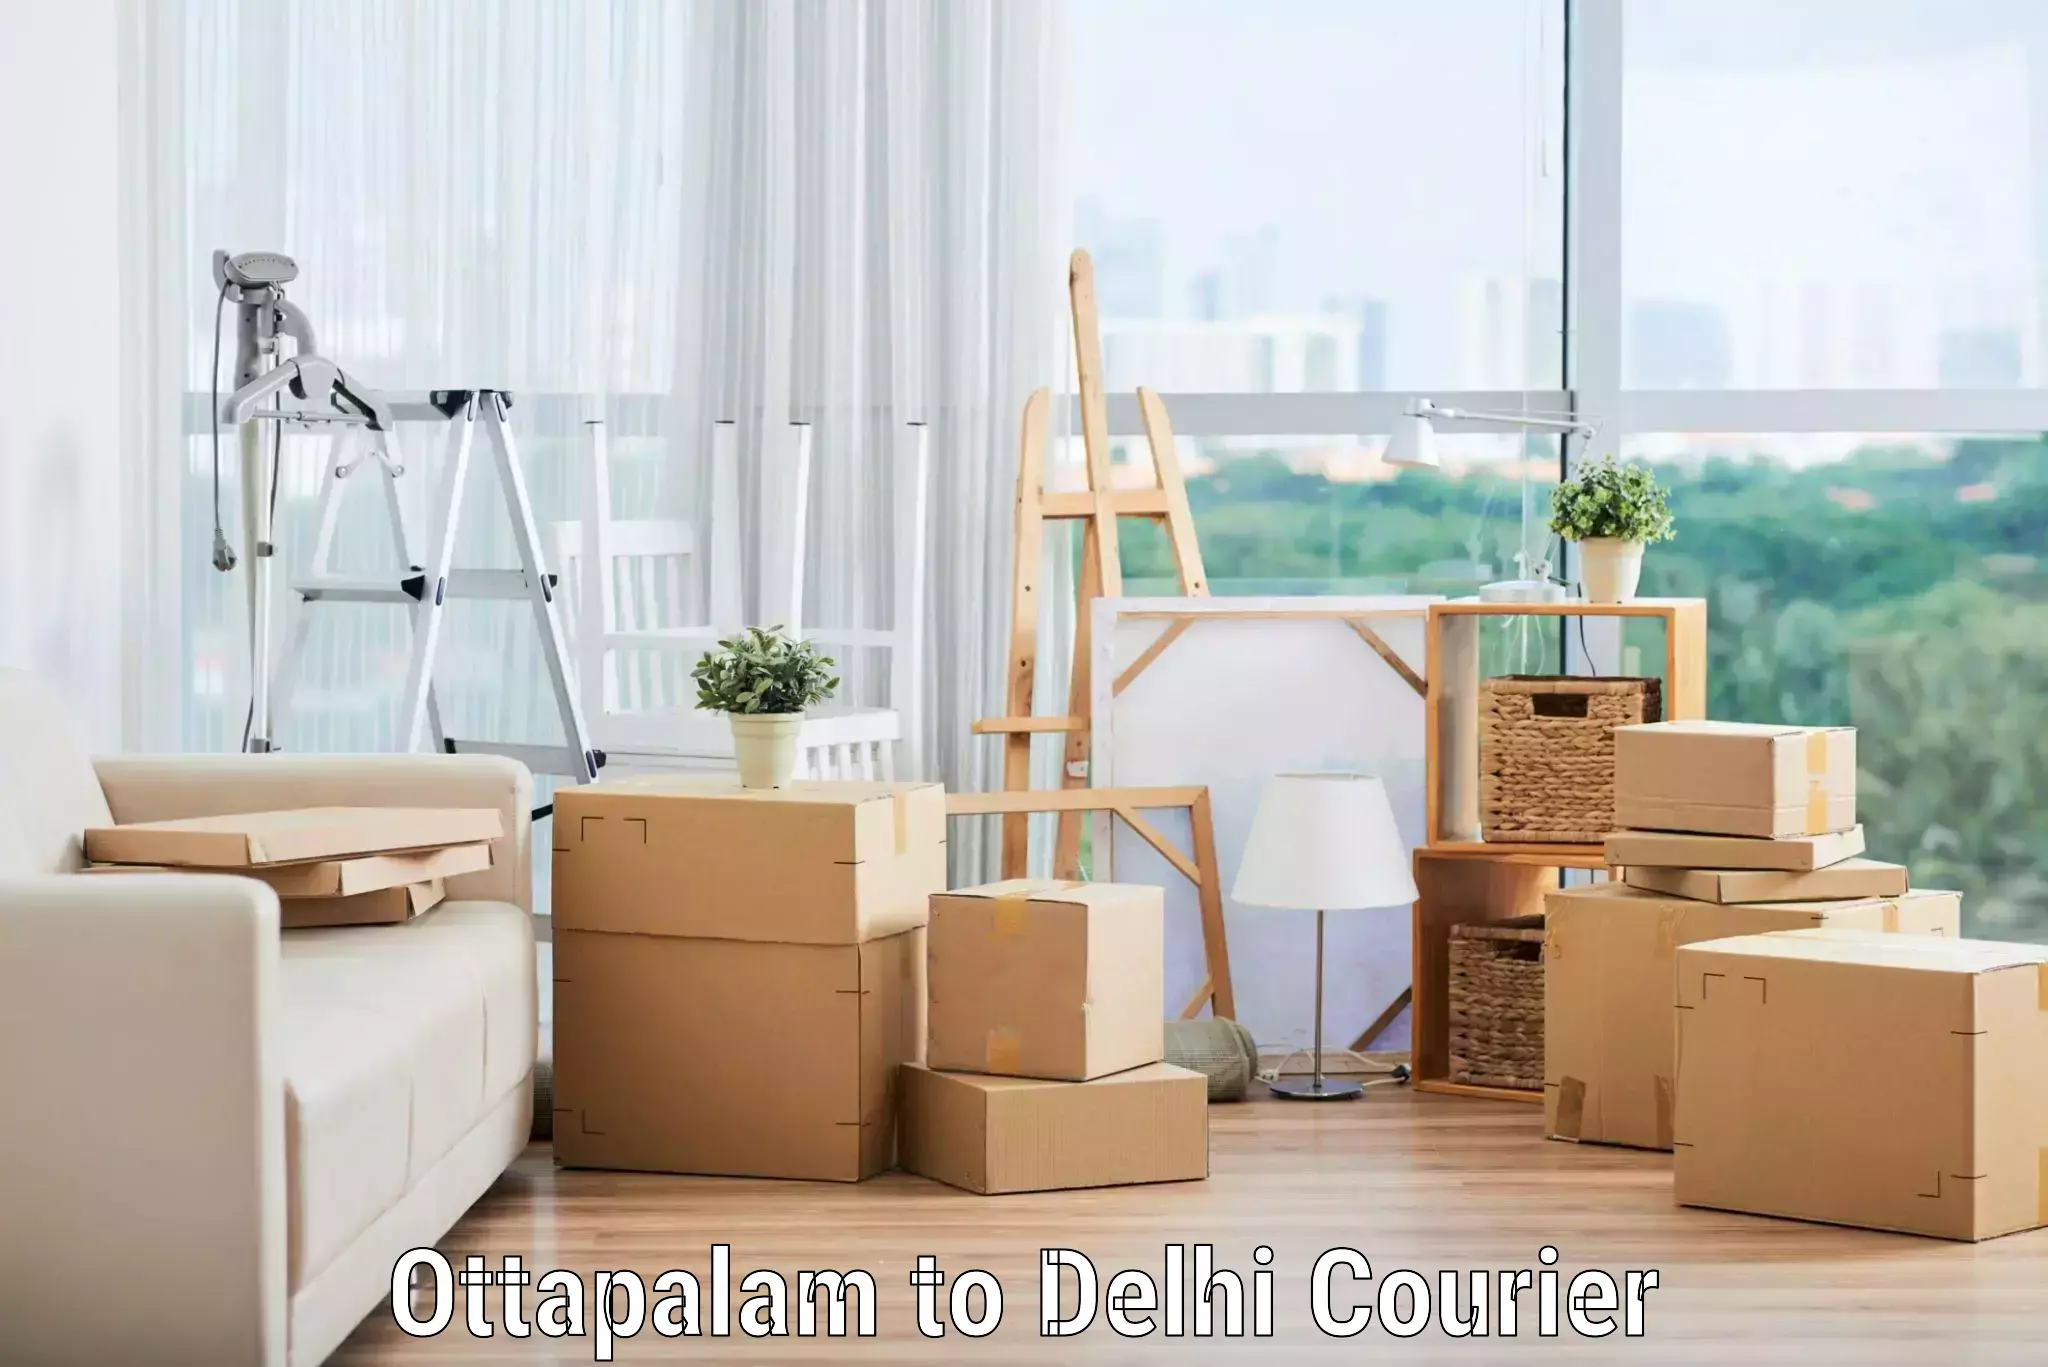 Hassle-free relocation Ottapalam to NCR